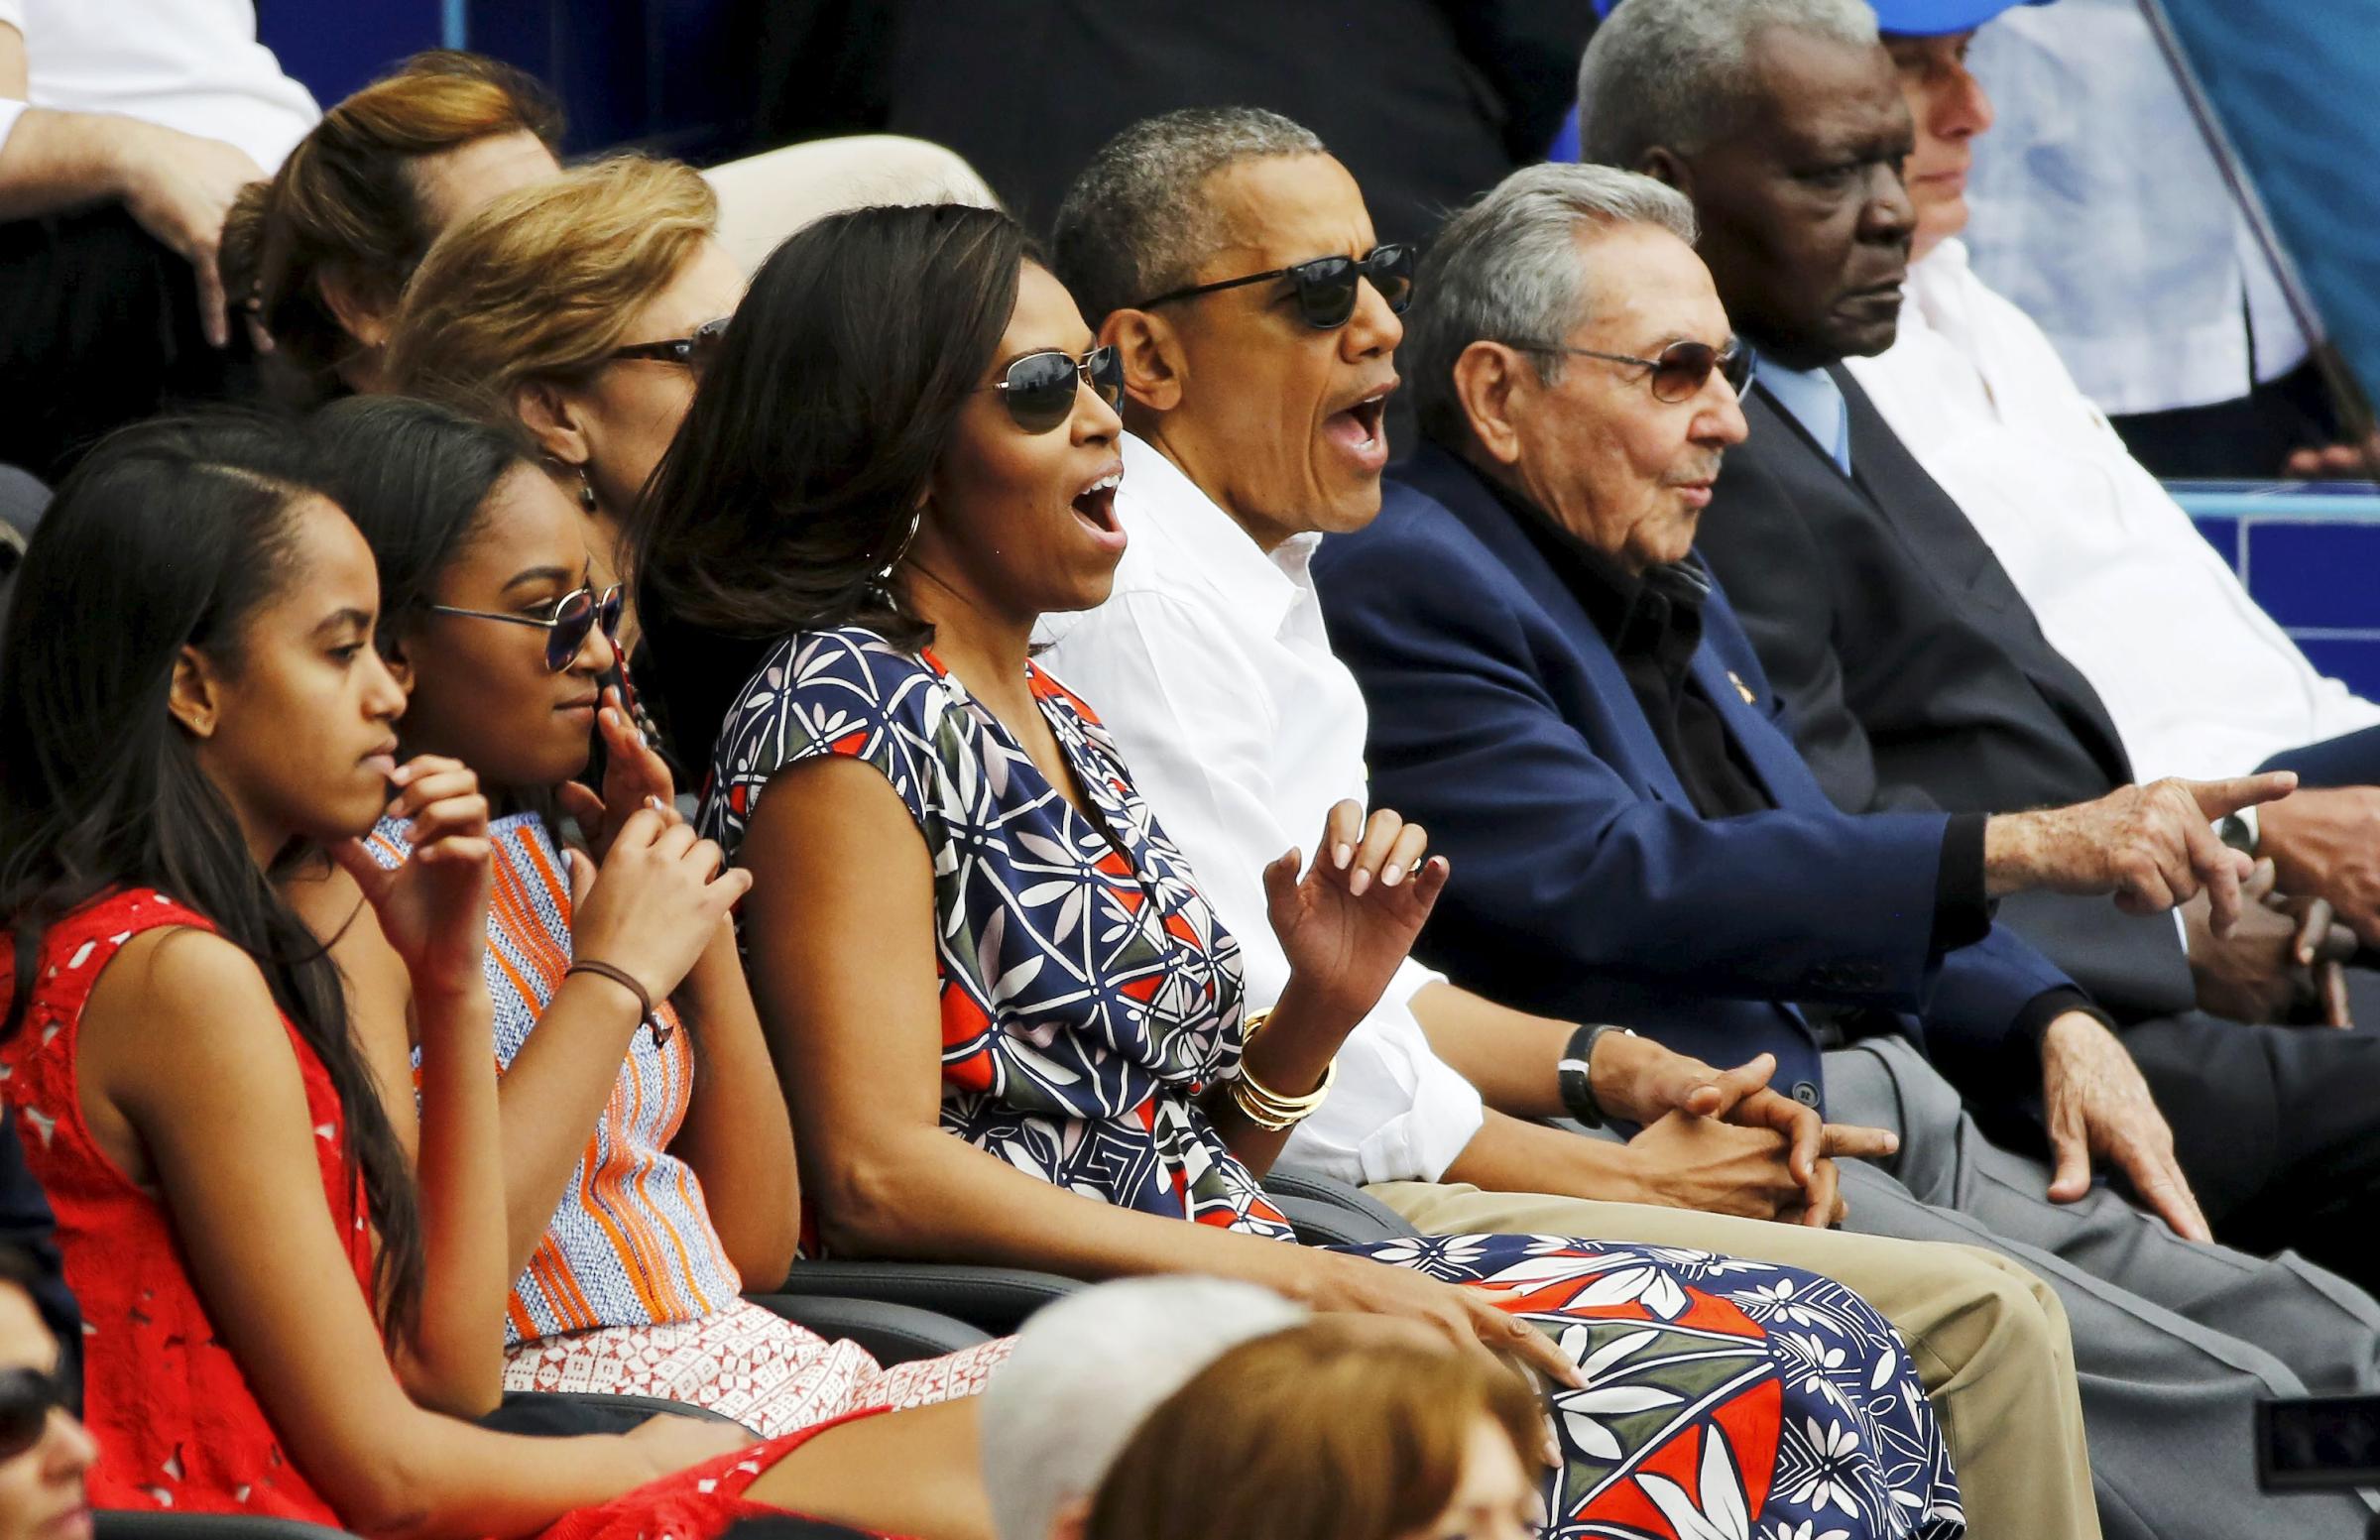 President Obama and his family watch a baseball game with Cuban President Castro in Havana on March 22.